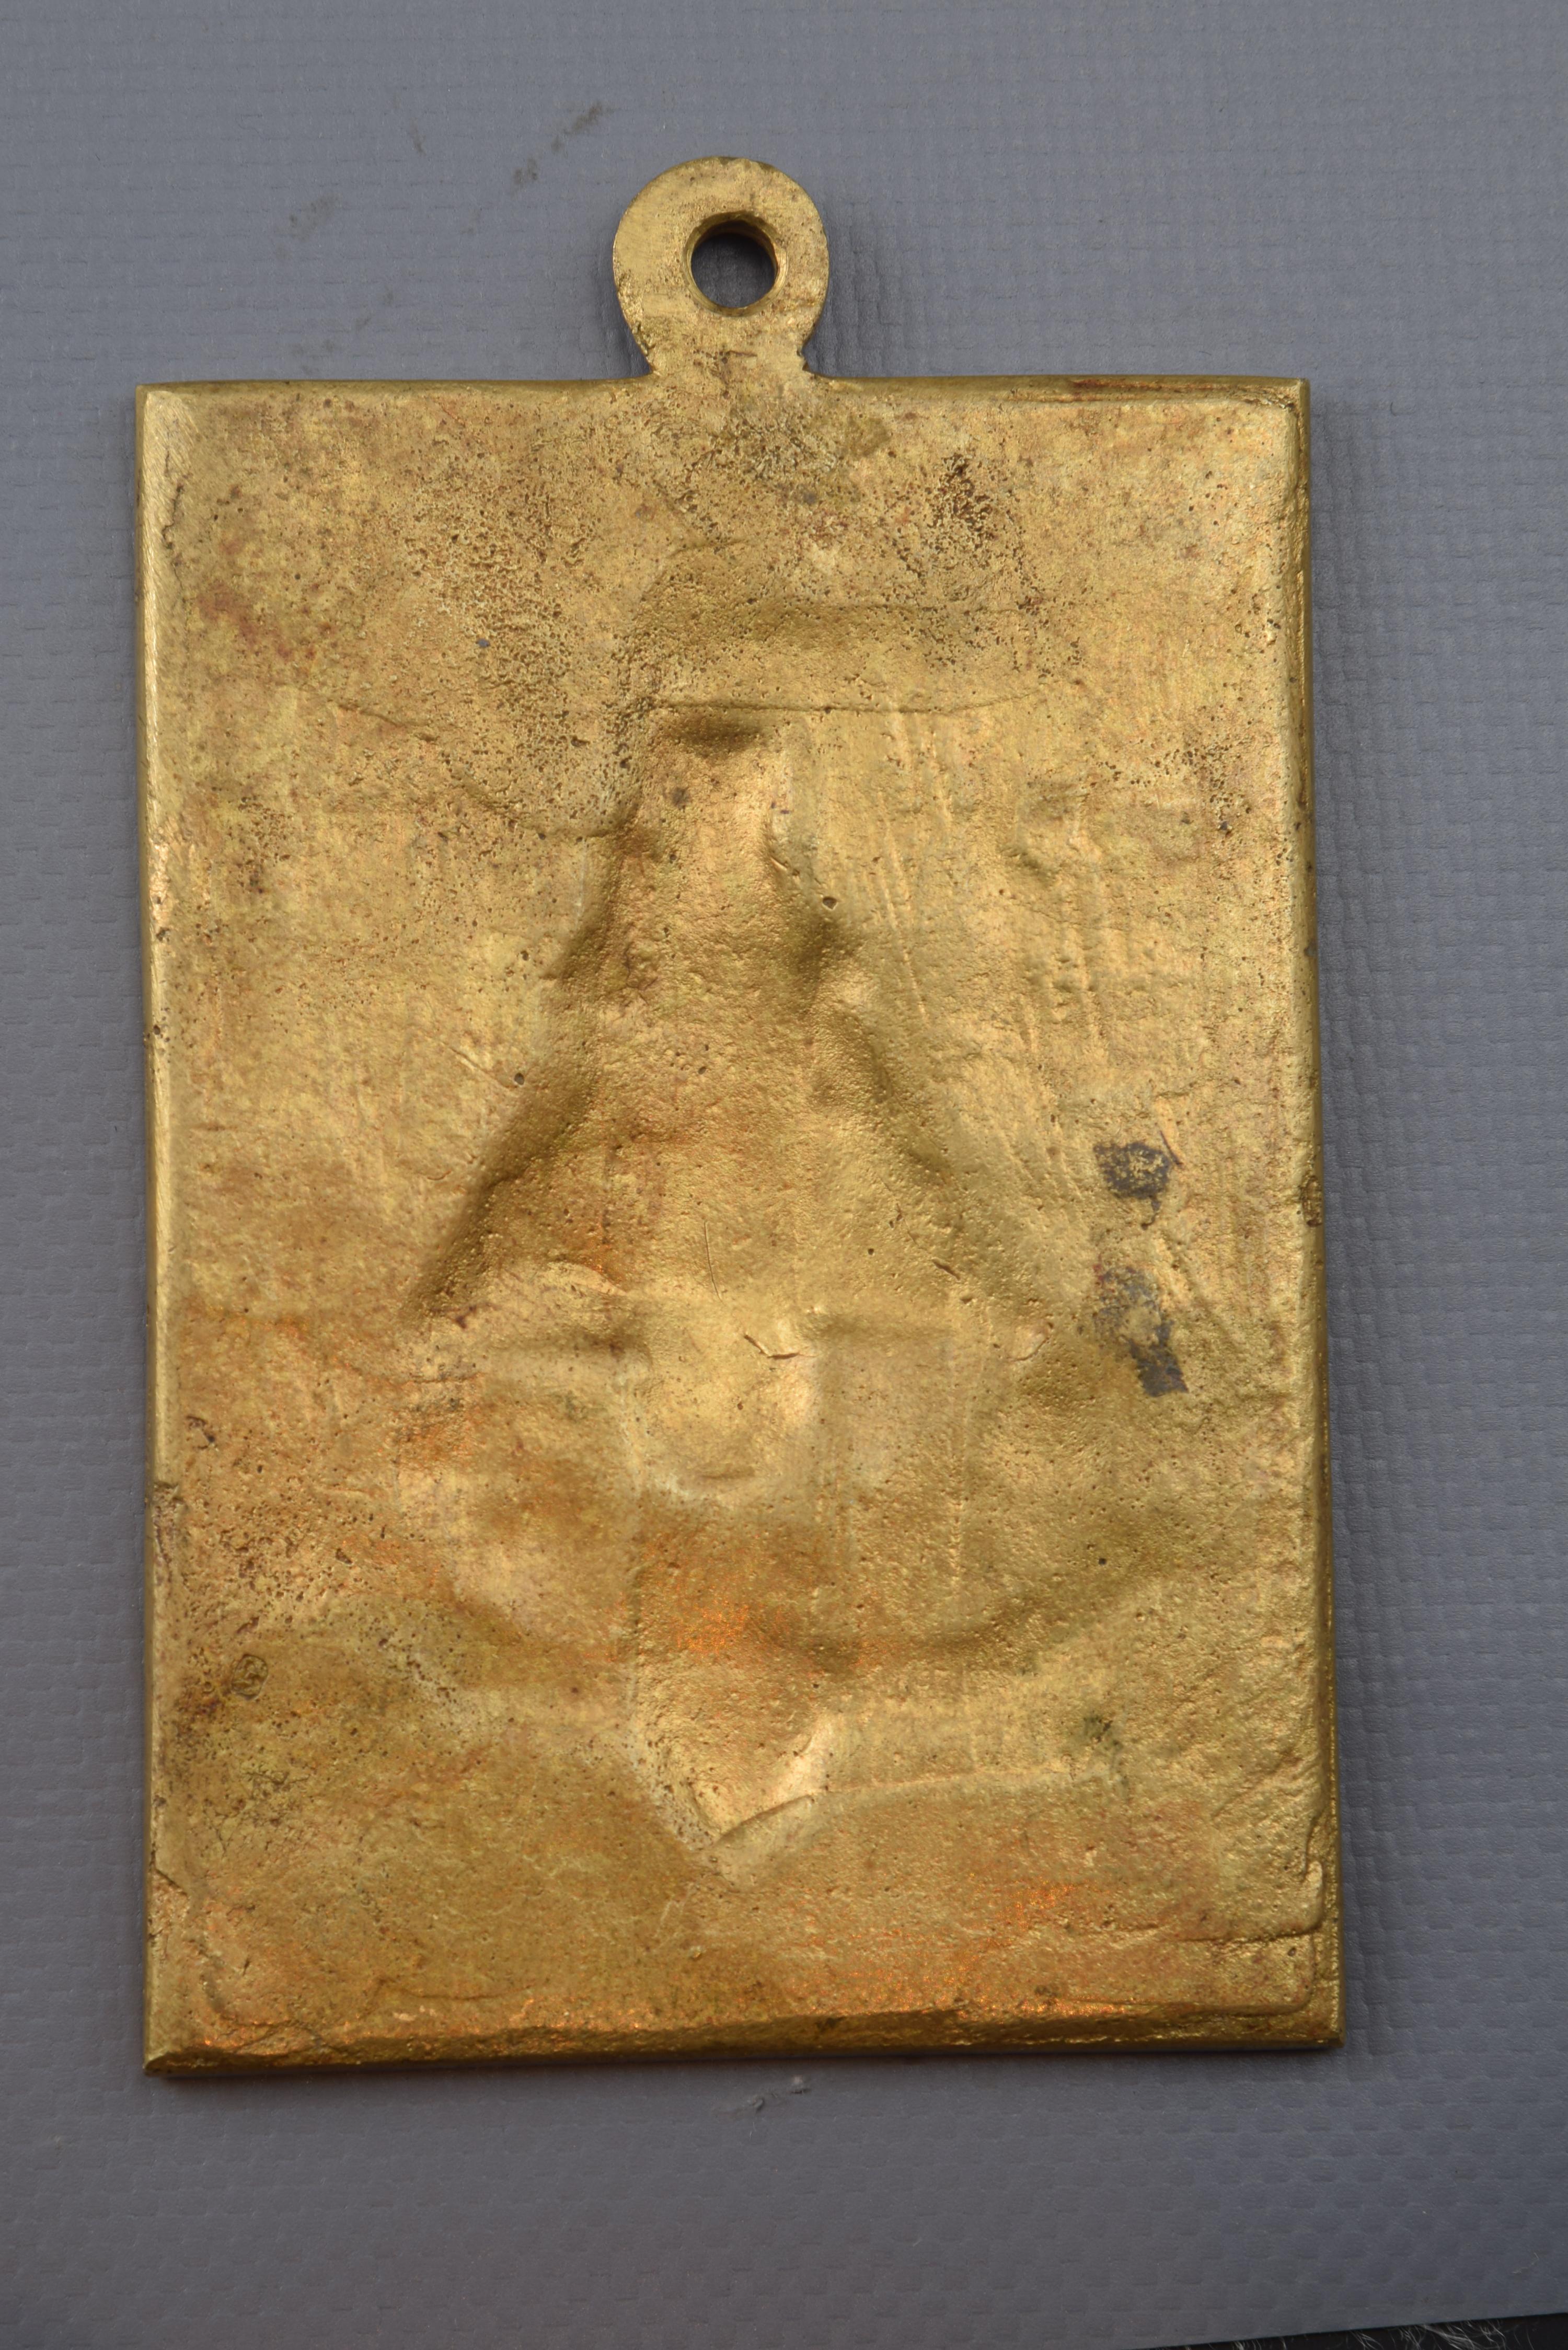 Devotional plaque, Our Lady of Covadonga. Bronze, 20th century.
Rectangular bronze plate that has a ring on the top and a simple frame to highlight the relief of the front. On a mountainous background in which a characteristic construction is